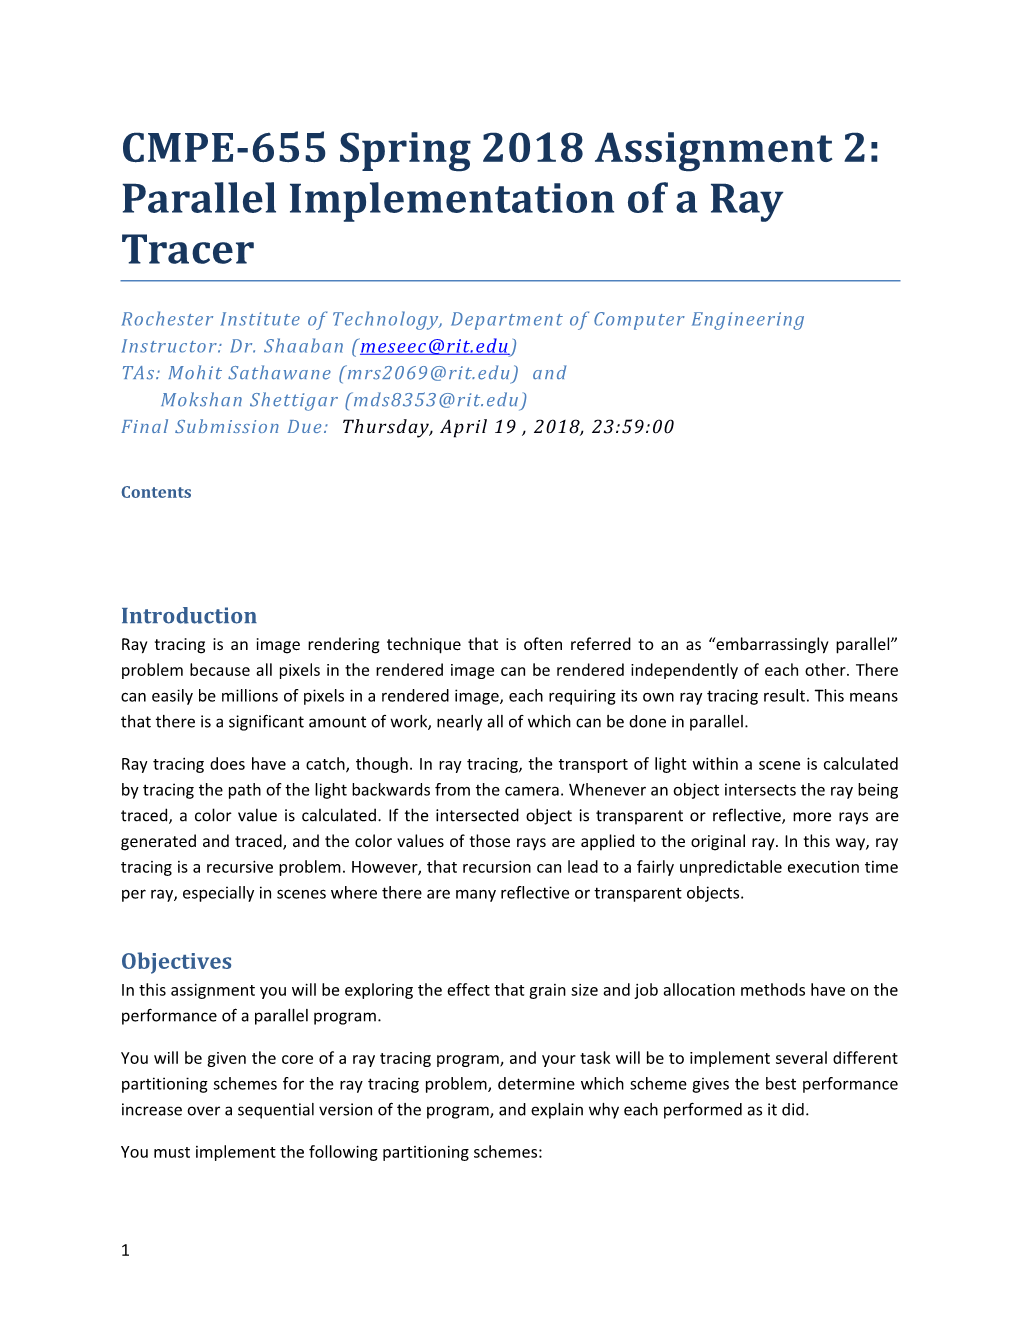 CMPE-655Spring 2018 Assignment 2: Parallel Implementation of a Ray Tracer